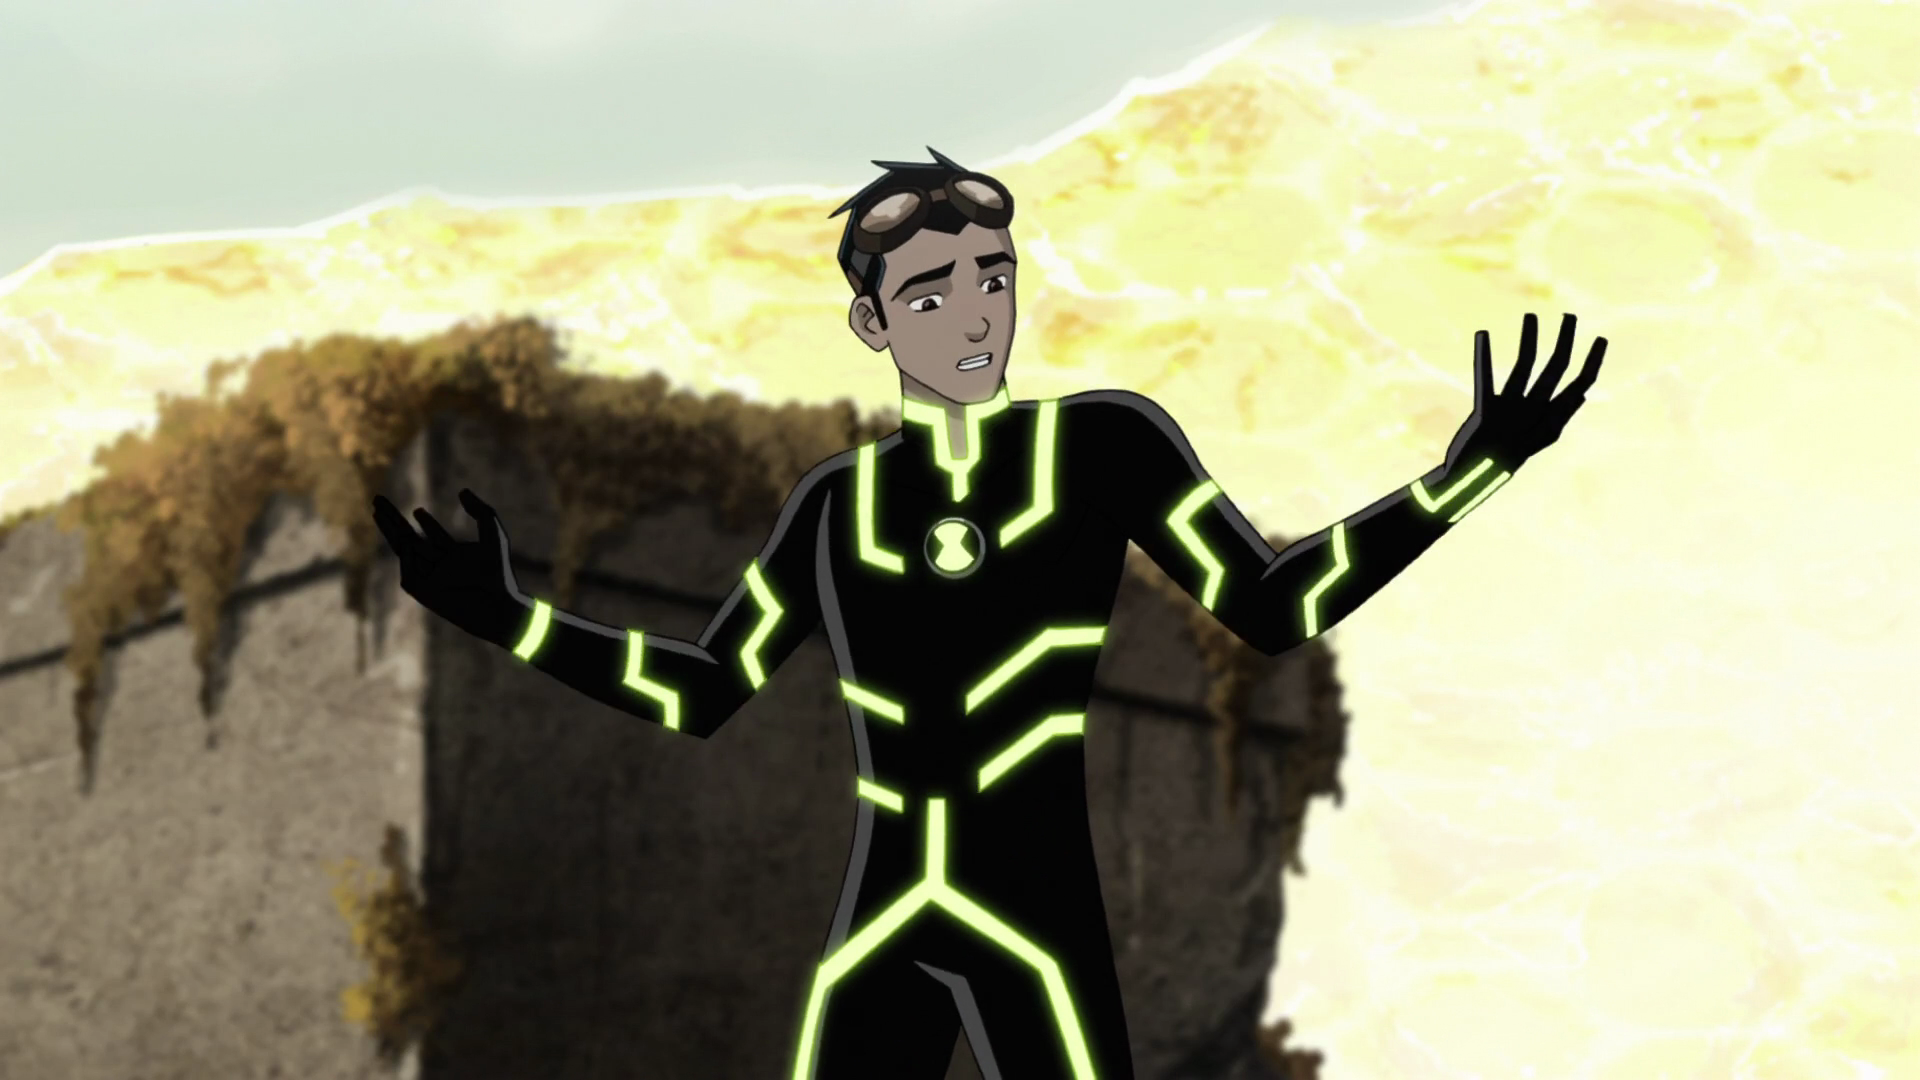 Ben 10/Generator Rex: Heroes United HD Wallpapers and Backgrounds